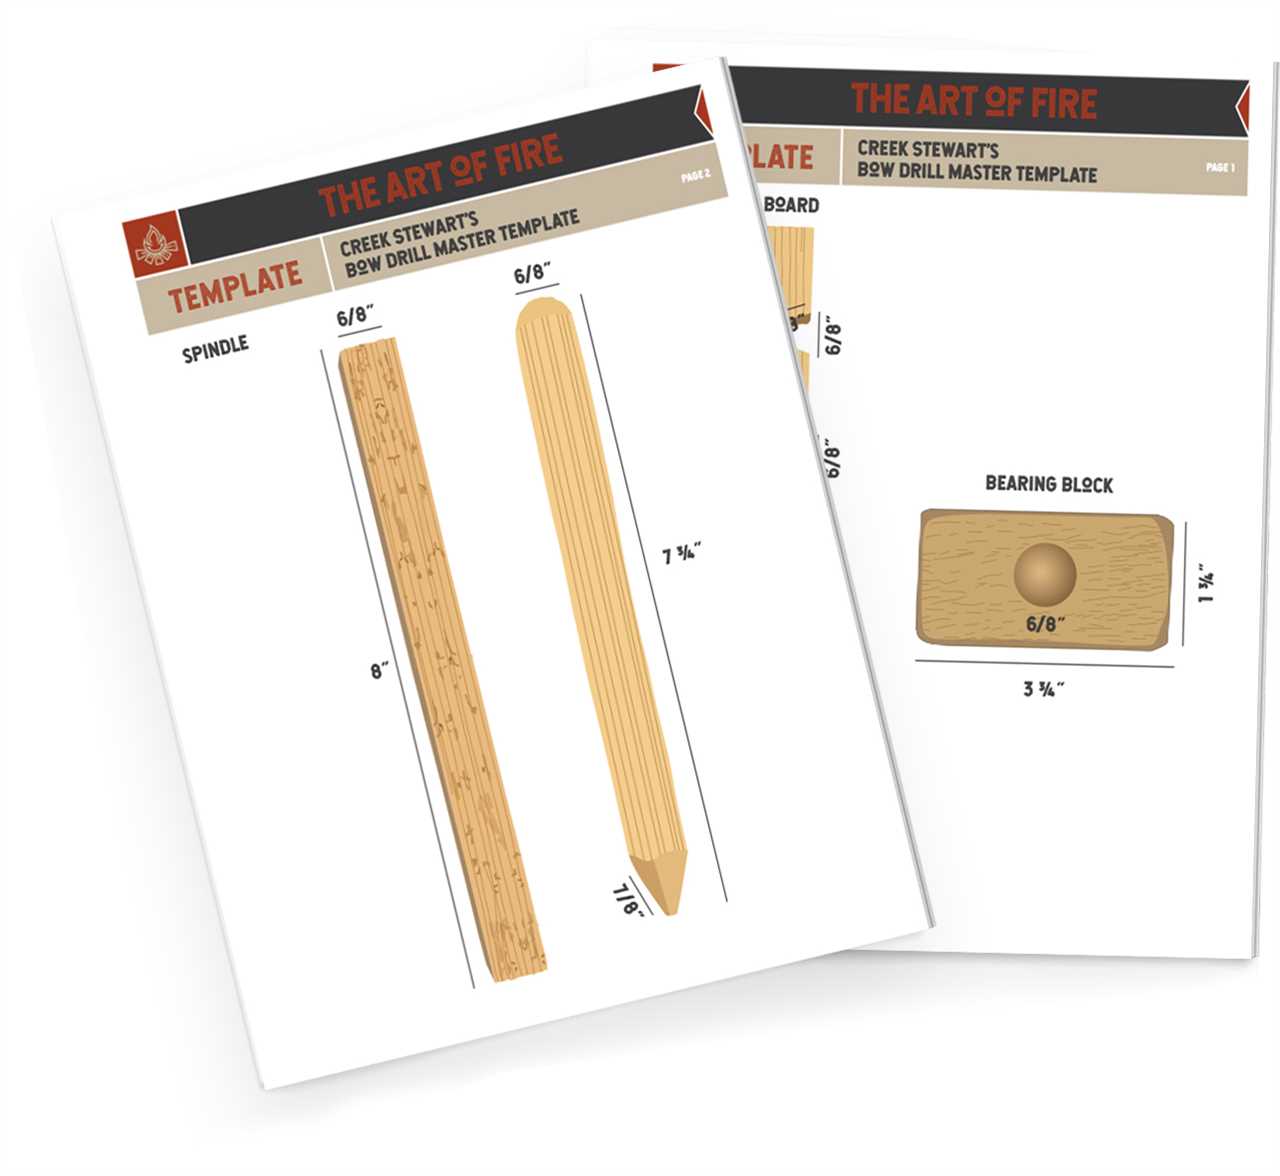 Best Wood for Bow Drill: How to choose the perfect wood for your Friction Fire Bow Drill Kit